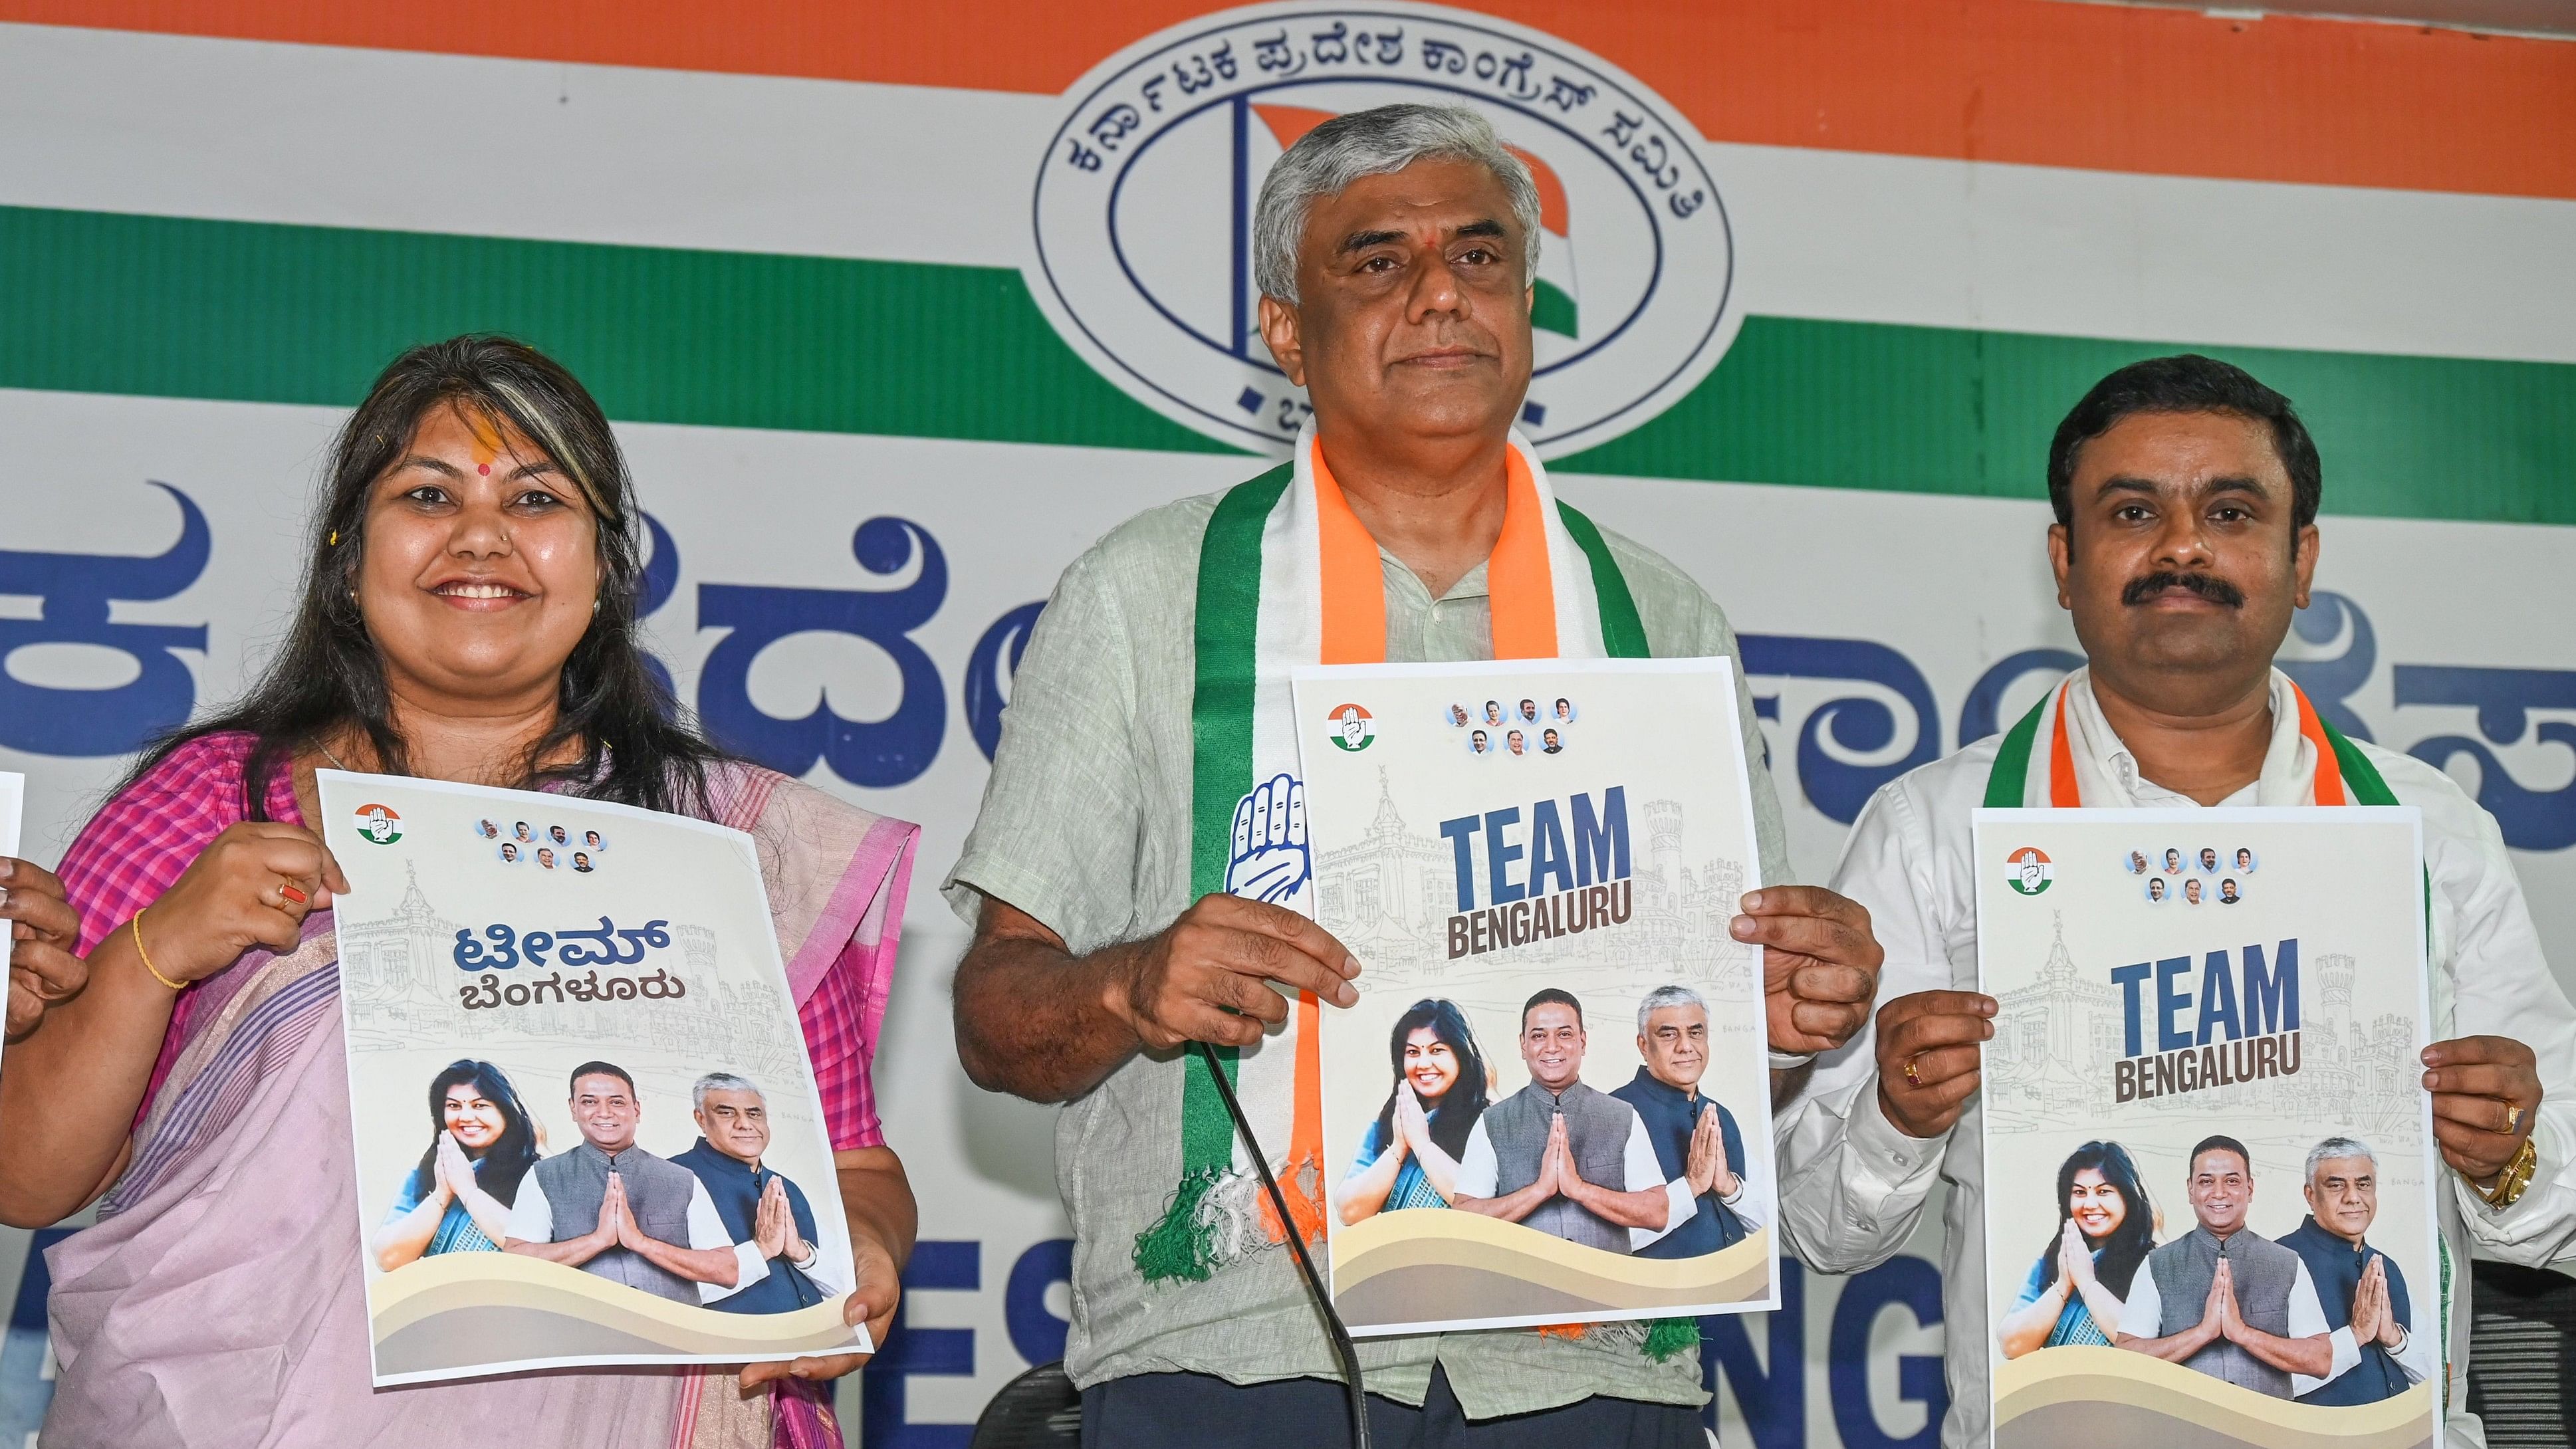 <div class="paragraphs"><p>Congress candidates for Lok Sabha elections Sowmya Reddy and Prof M V Rajeev Gowda release "Team Bengaluru" poster in Bengaluru on Wednesday.&nbsp;</p></div>